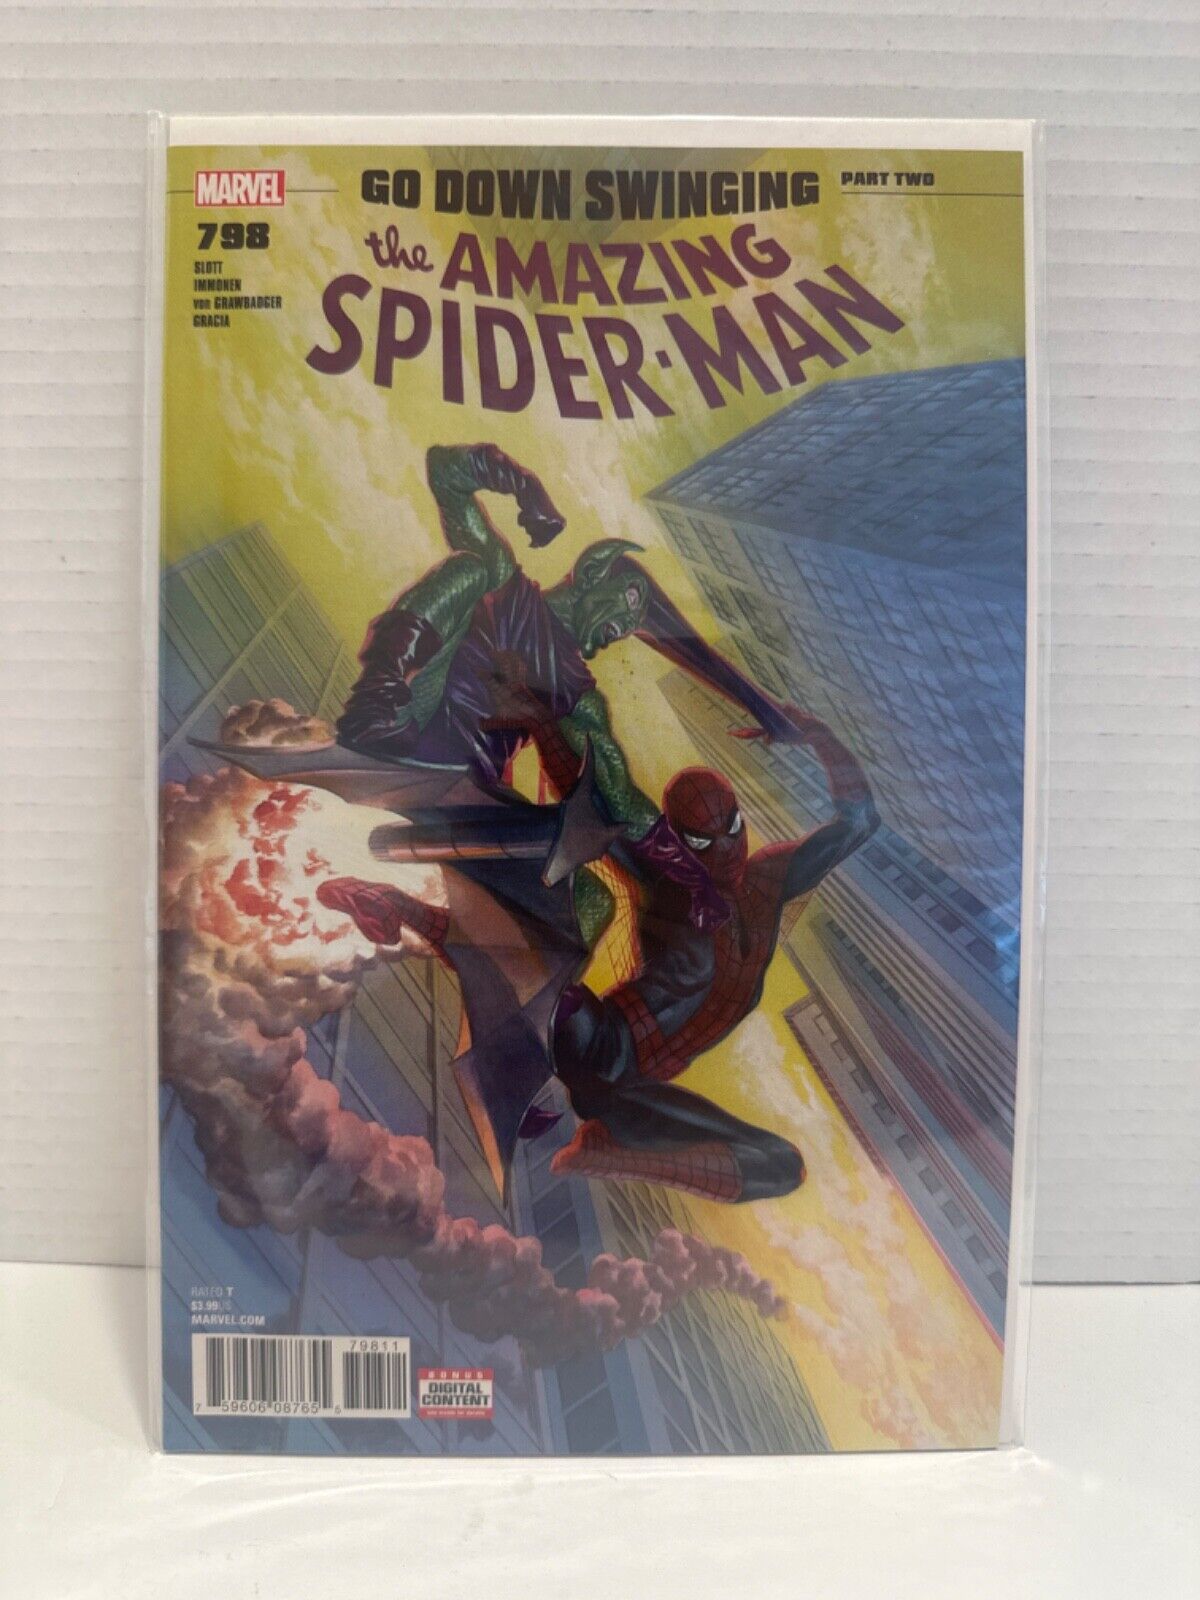 THE AMAZING SPIDER-MAN #798 1st Print First Appearance Red Goblin